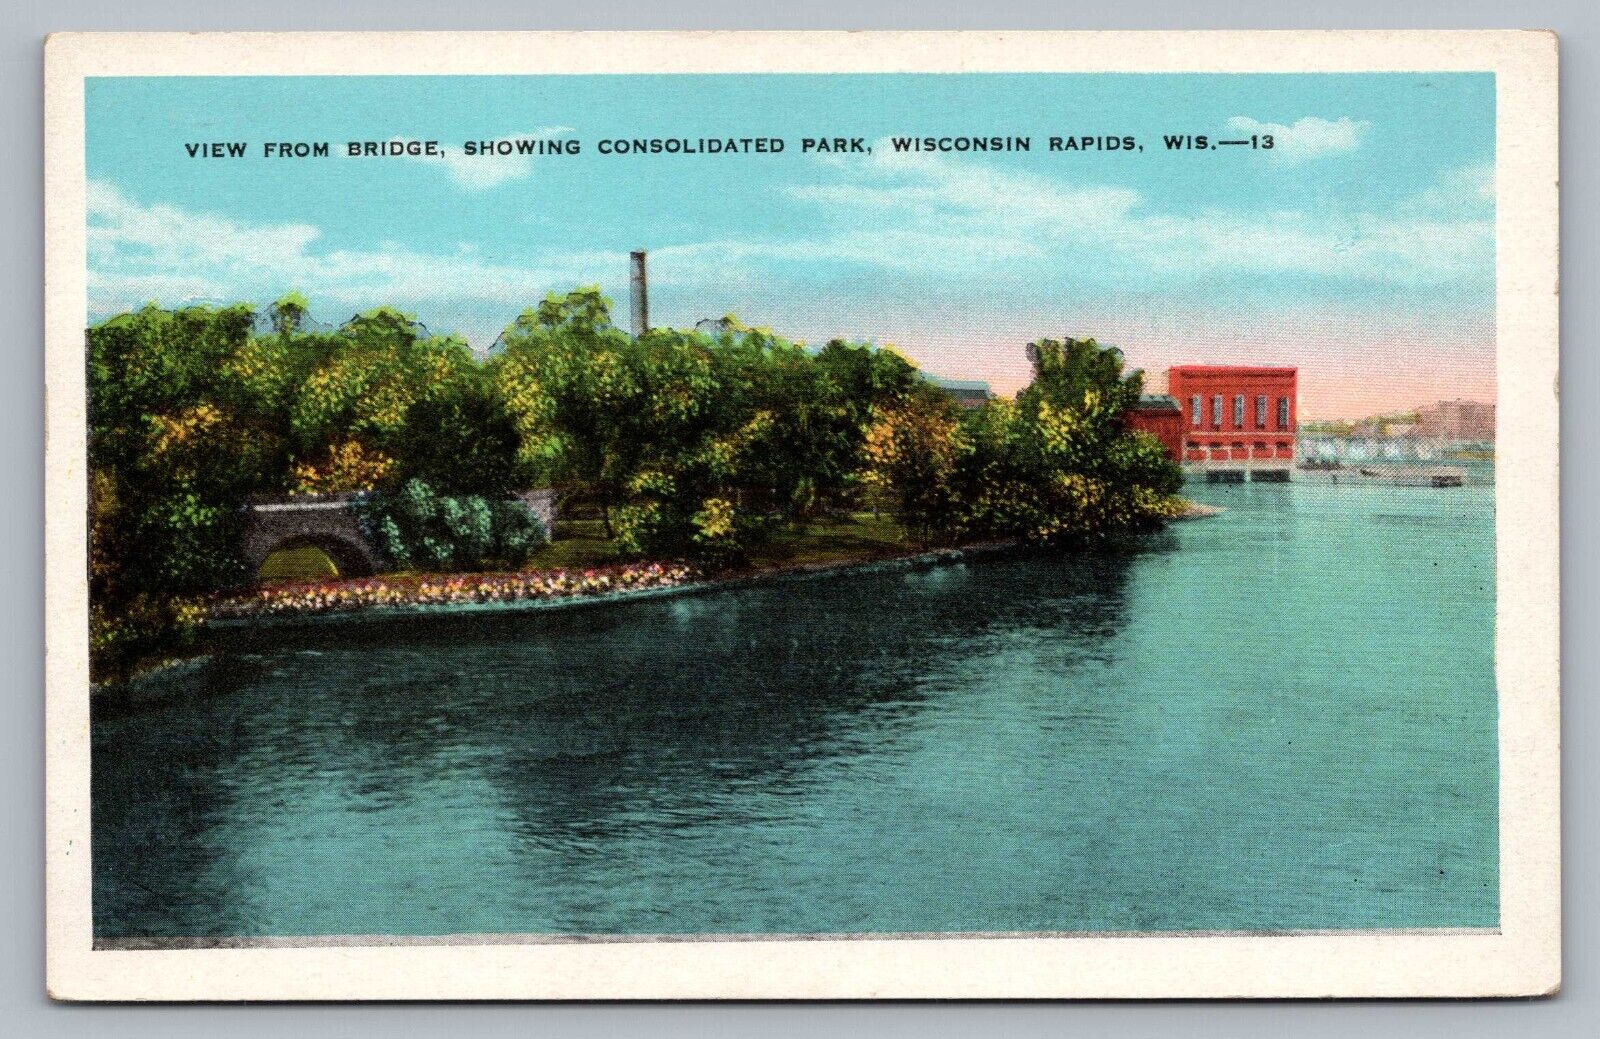 Consolidated Park WI c1920s Wisconsin Rapids View From Bridge Postcard Vtg G4